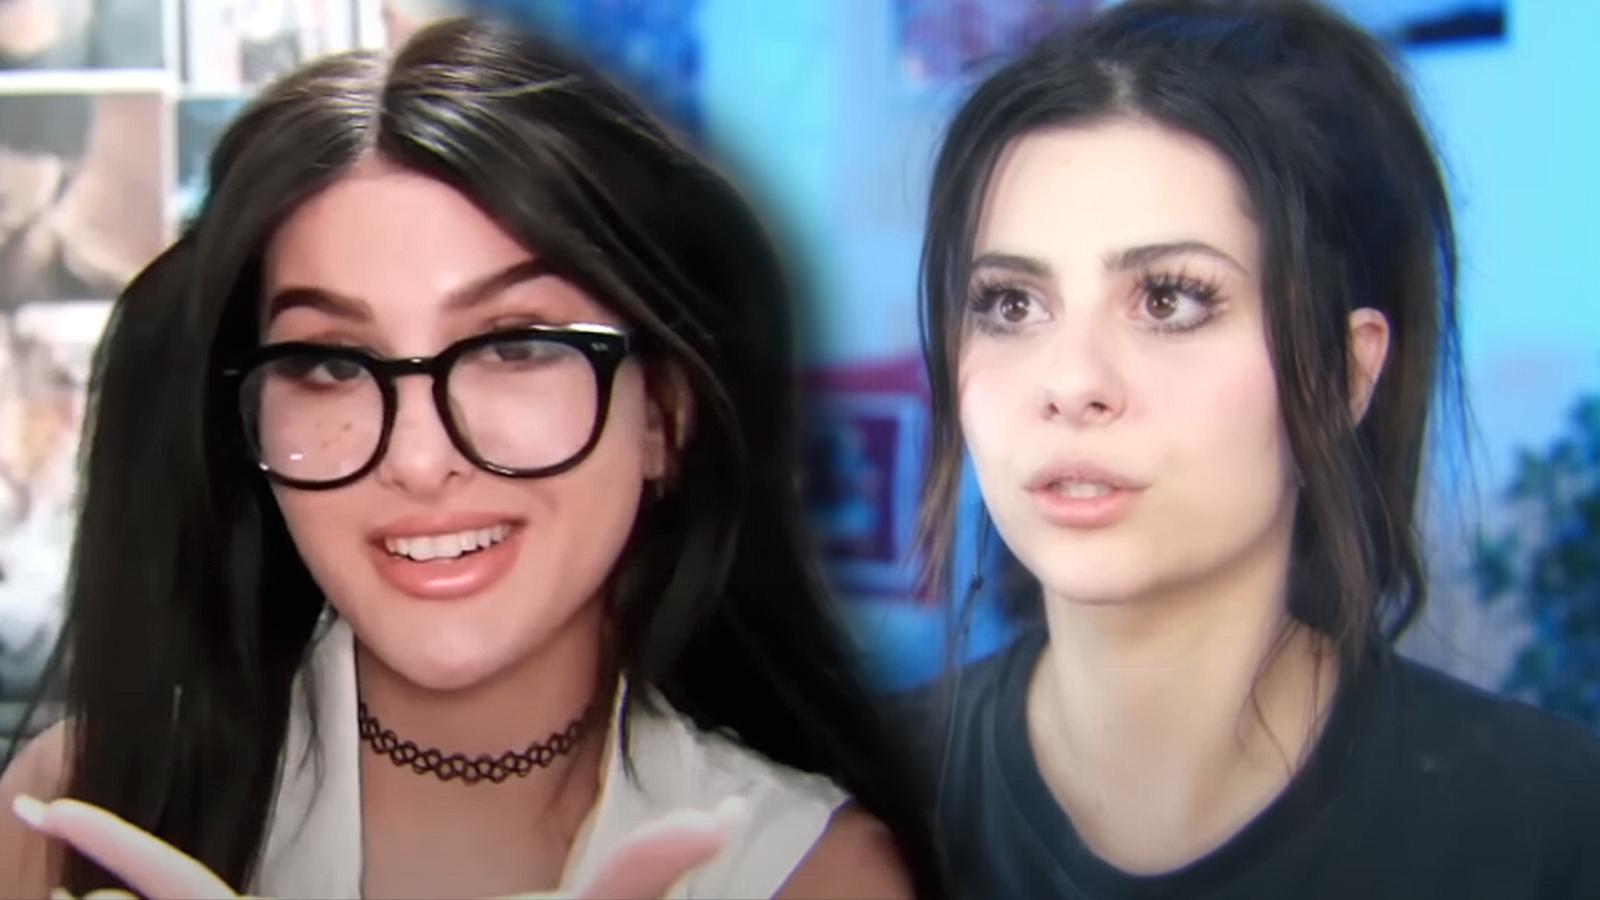 azzyland-accuses-sssniperwolf-alleged-assault-fortnite-celebrity-pro-am